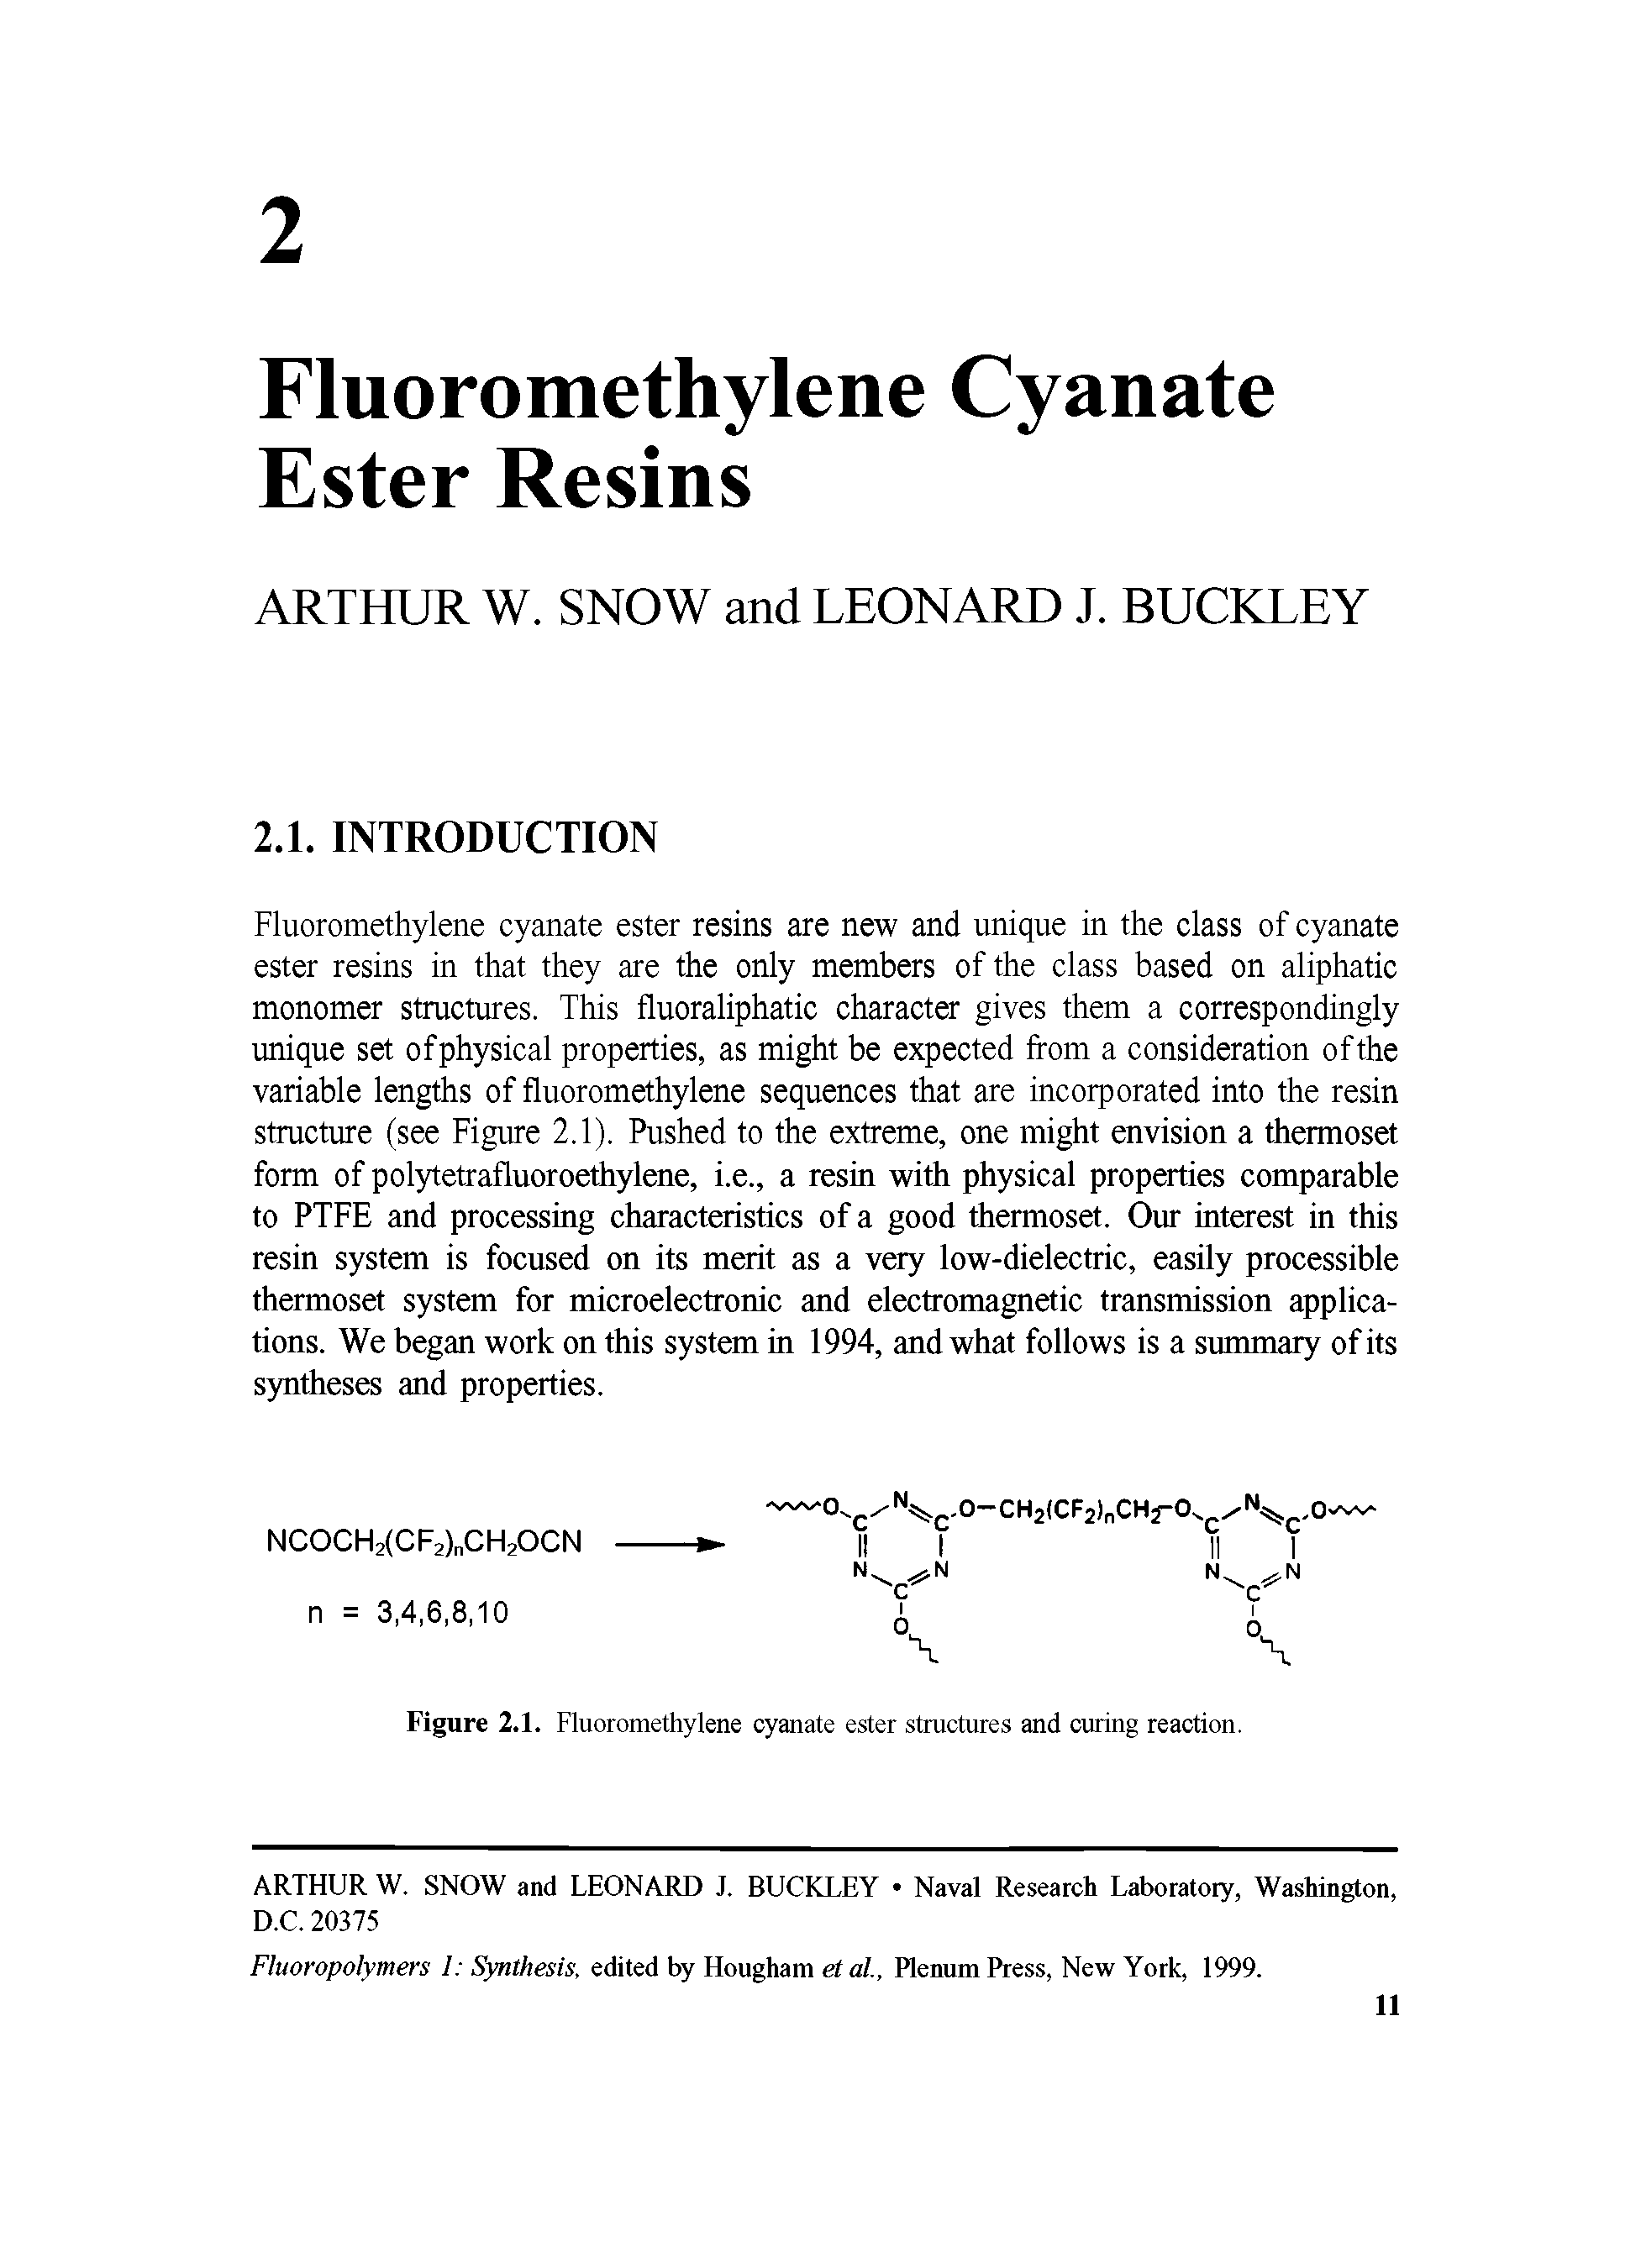 Figure 2.1. Fluoromethylene cyanate ester structures and curing reaction.